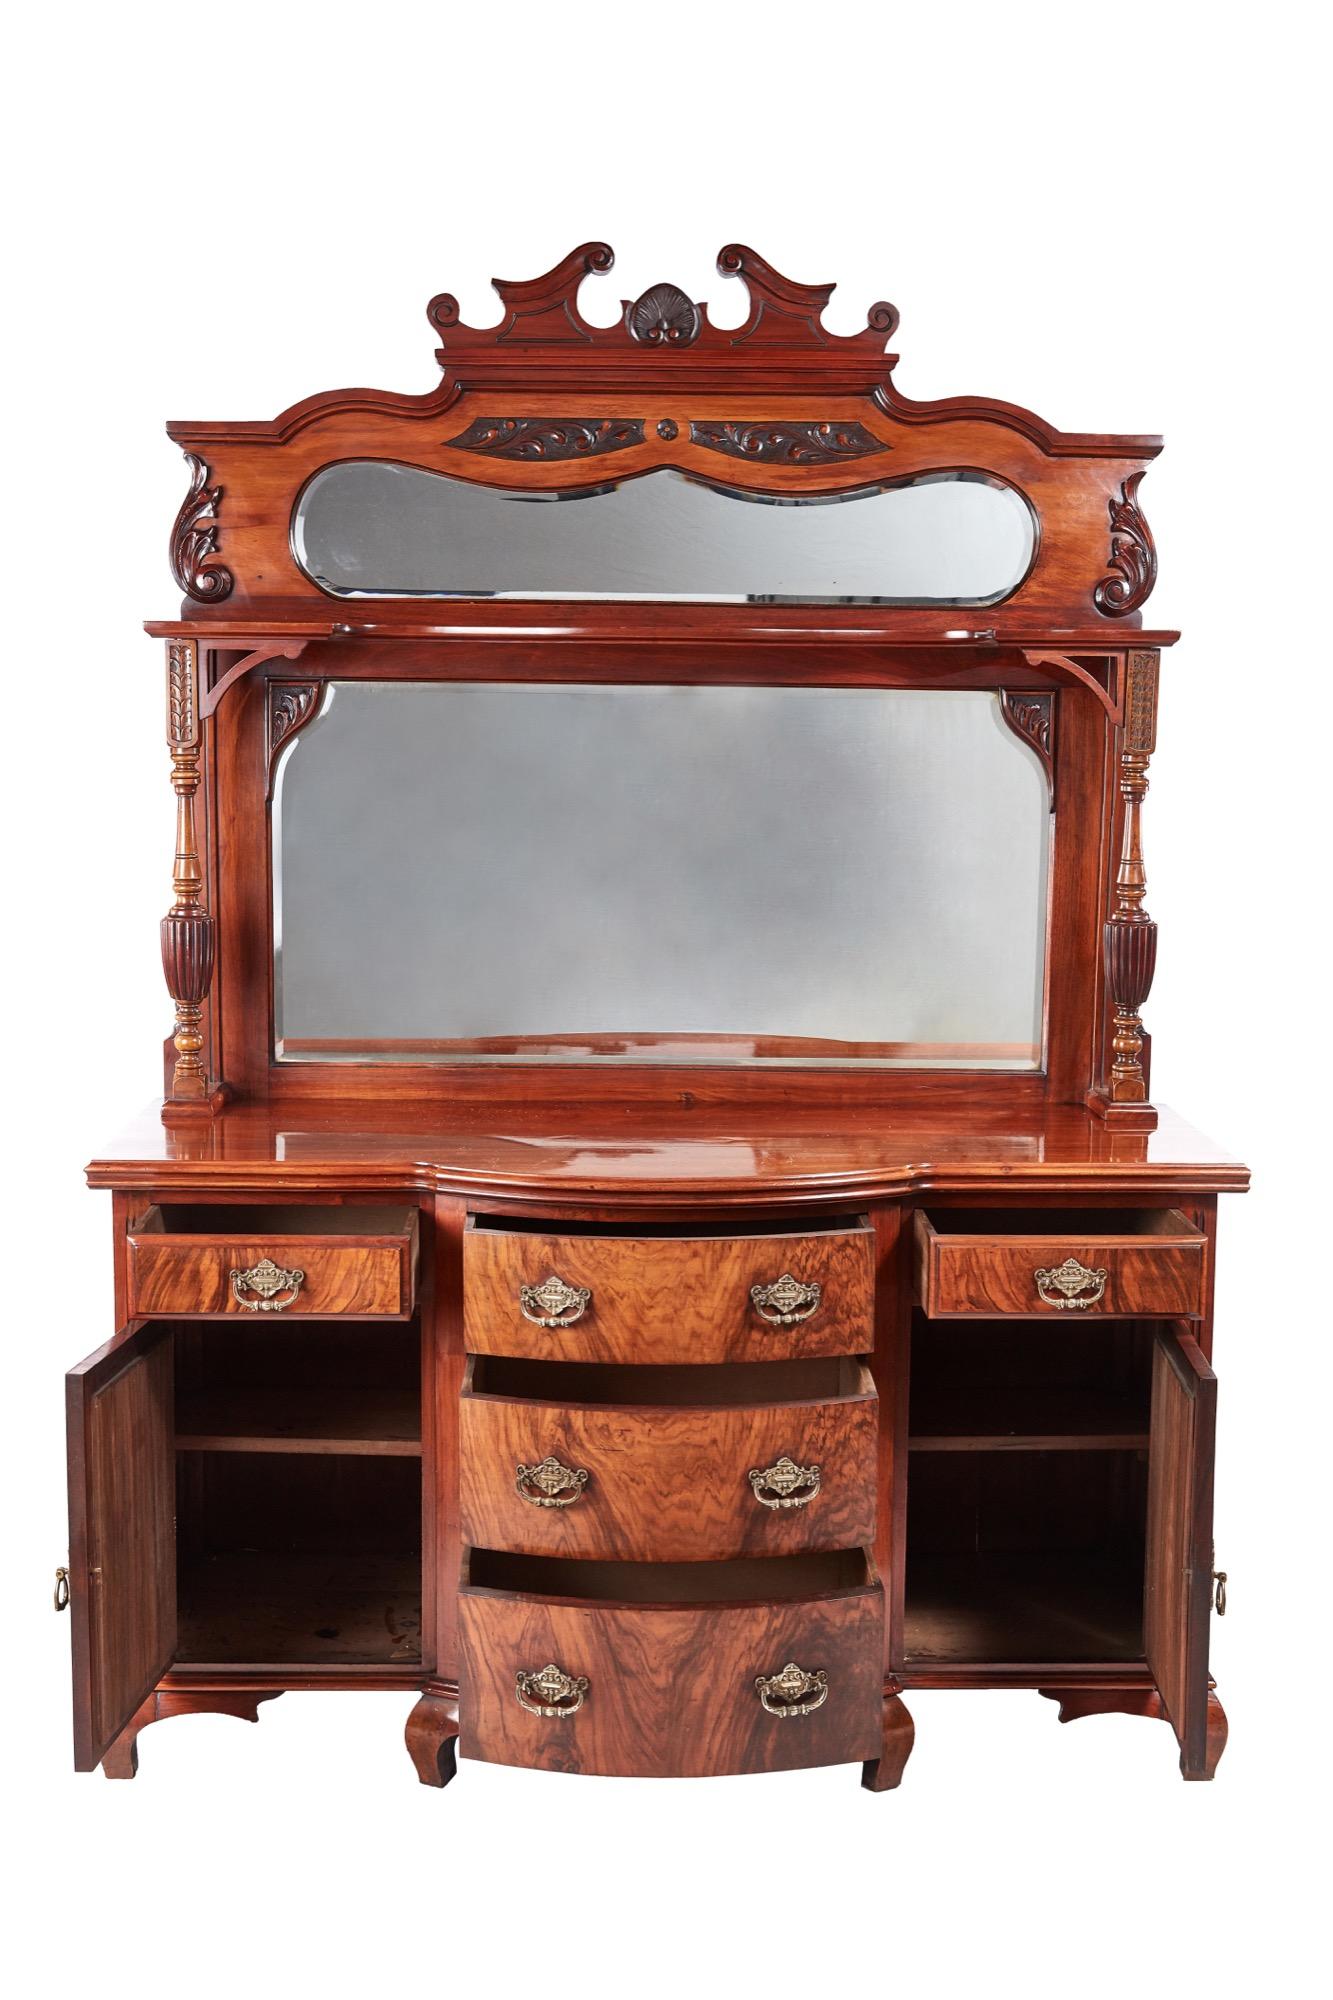 Fantastic quality antique Victorian carved walnut sideboard with a carved walnut swan-neck pediment, two lovely shaped bevelled edge mirrors, beautiful carved and reeded columns supporting a shaped shelf. The base with a shaped walnut top, five